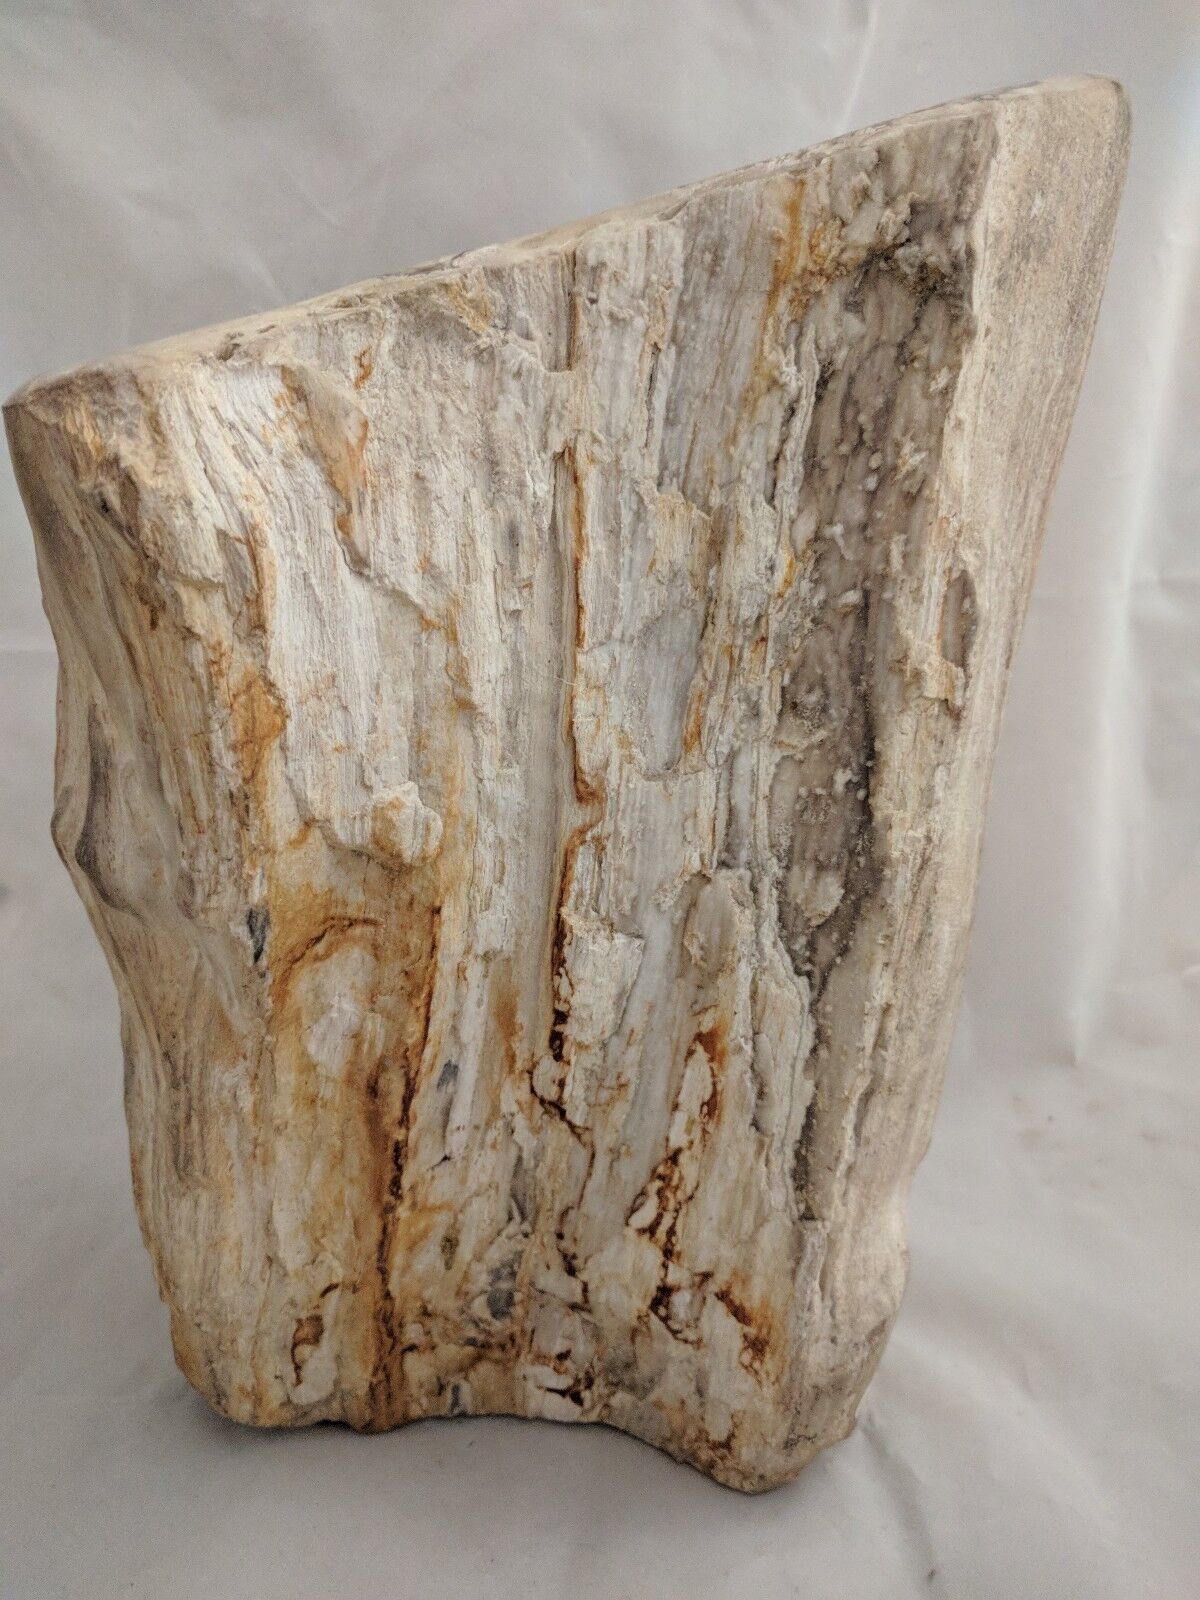 Large Petrified Wood Log Self standing Fossilized Trunk Fossil w/ Druzy Crystals